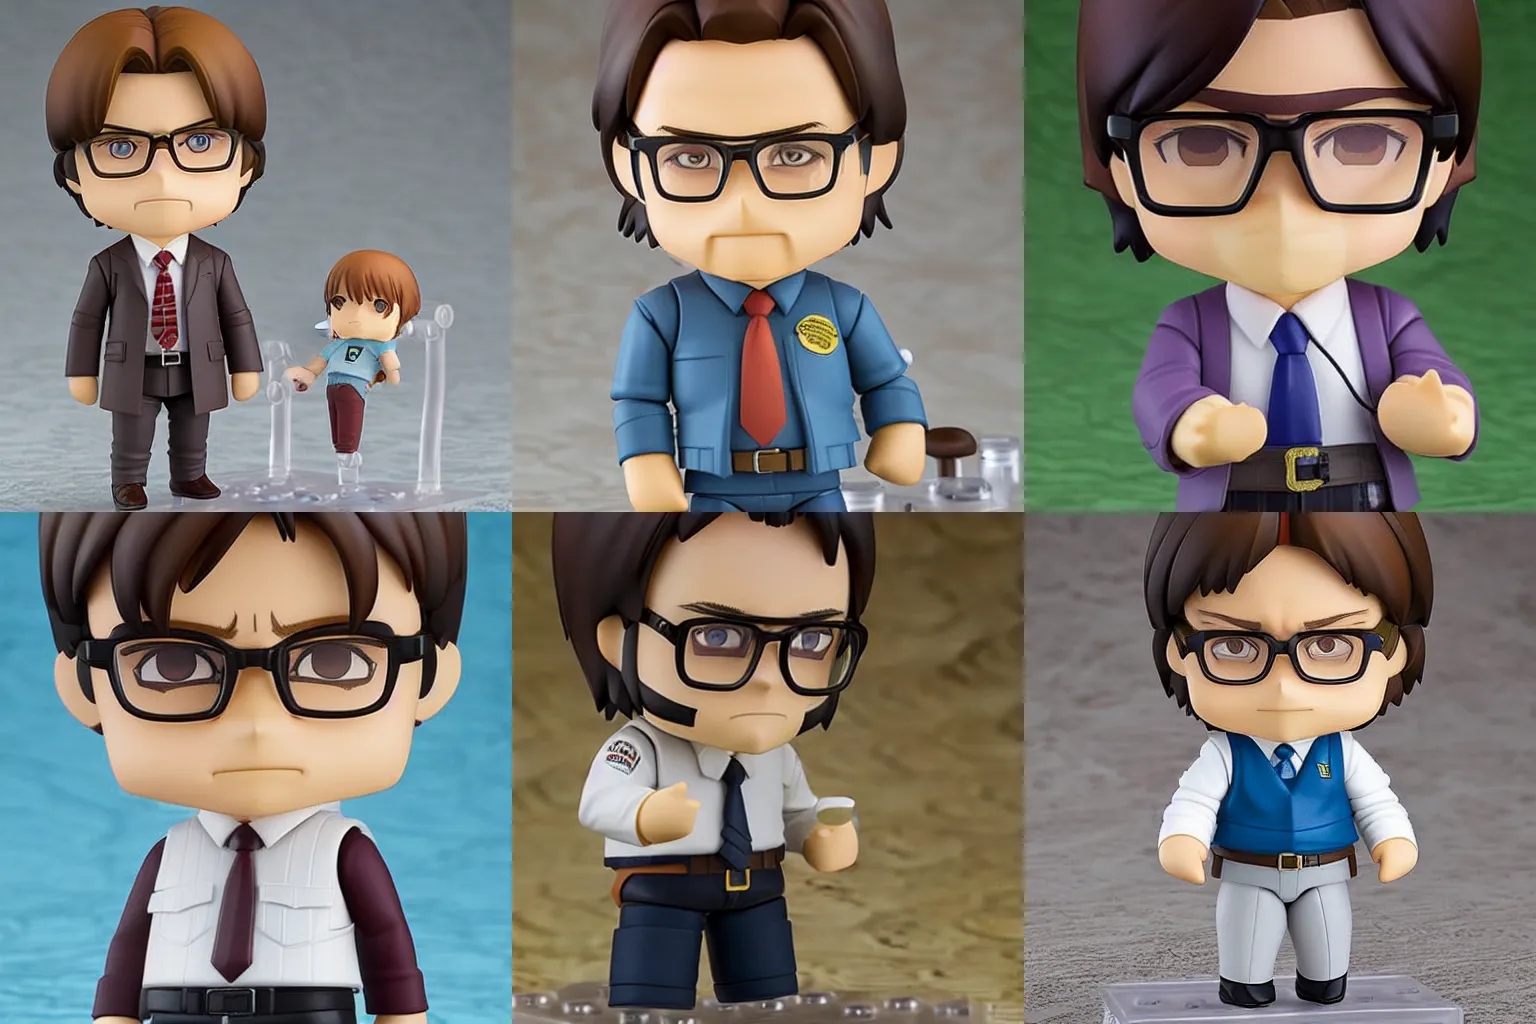 Prompt: Nendoroid of Dwight Schrute